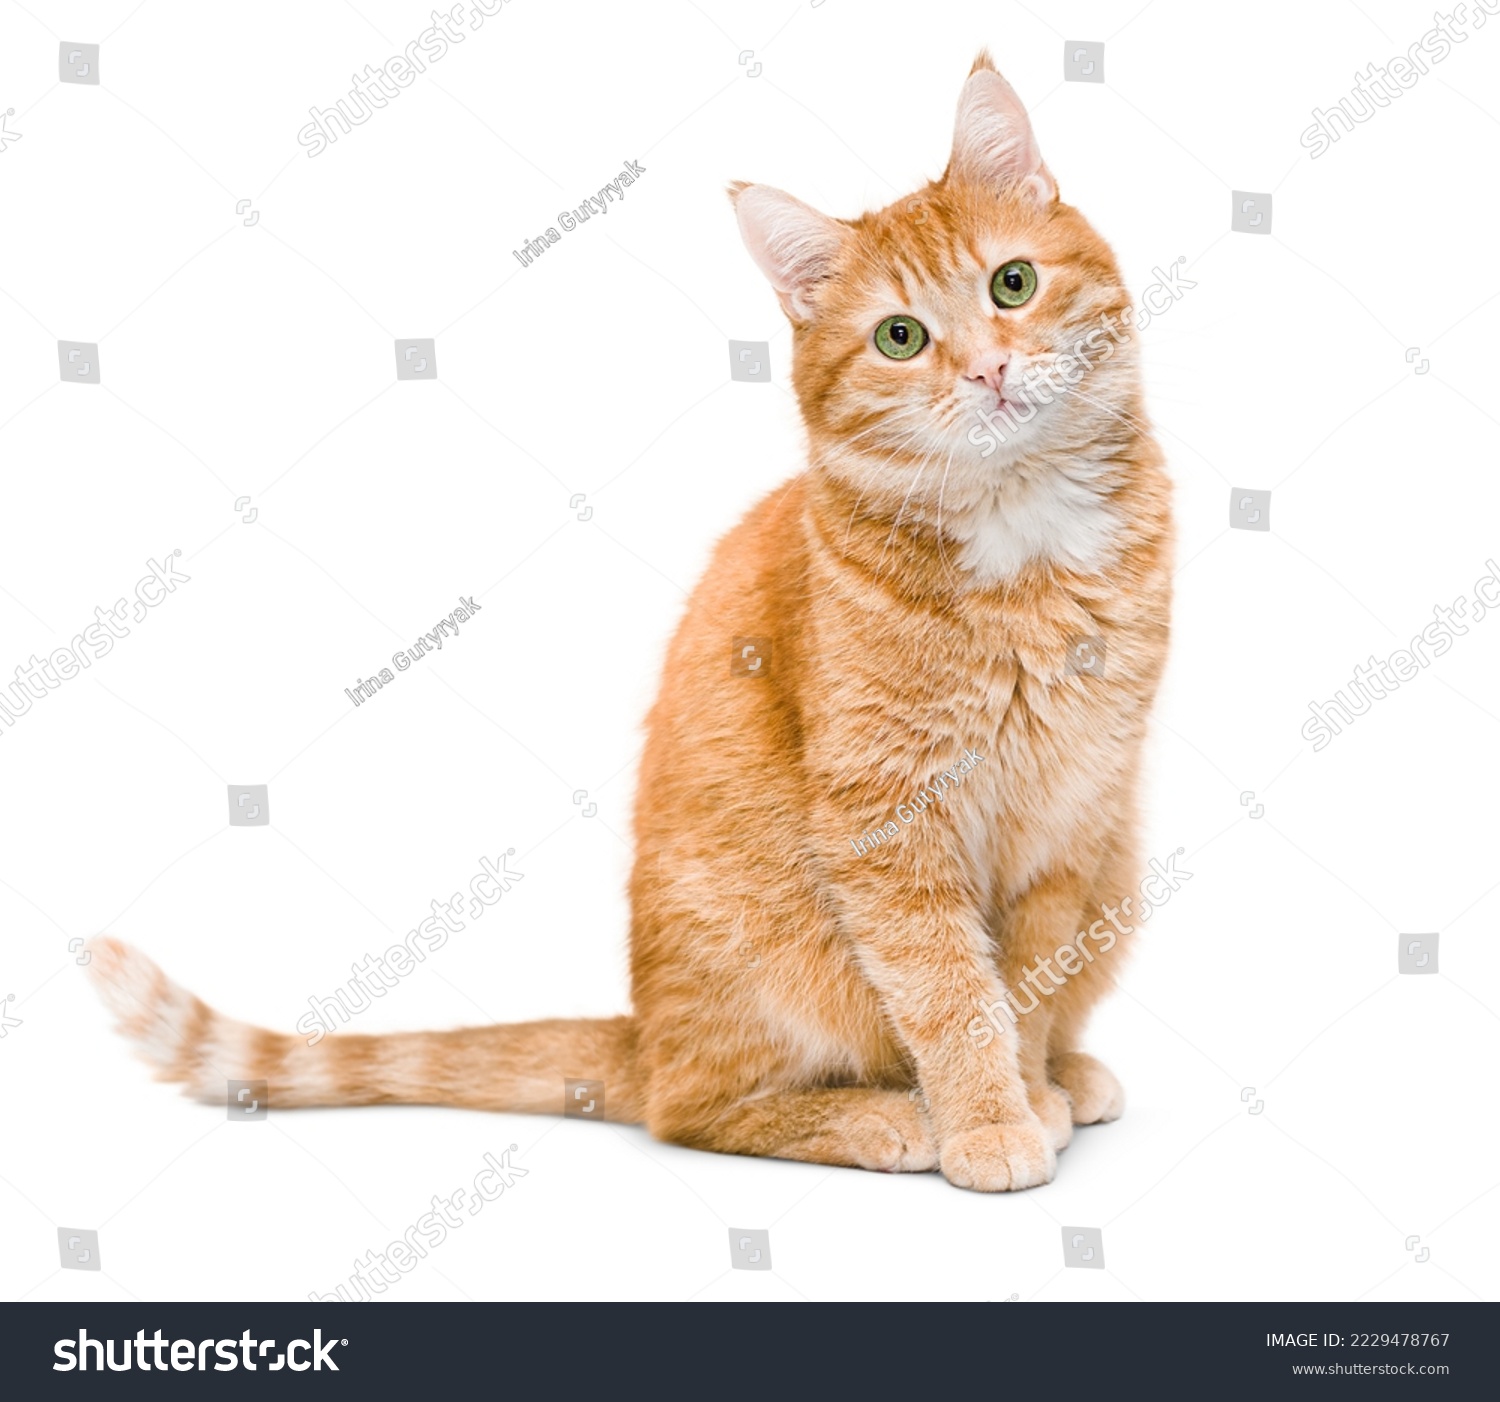 cute ginger cat sitting and looking at the camera ,isolated on white background #2229478767